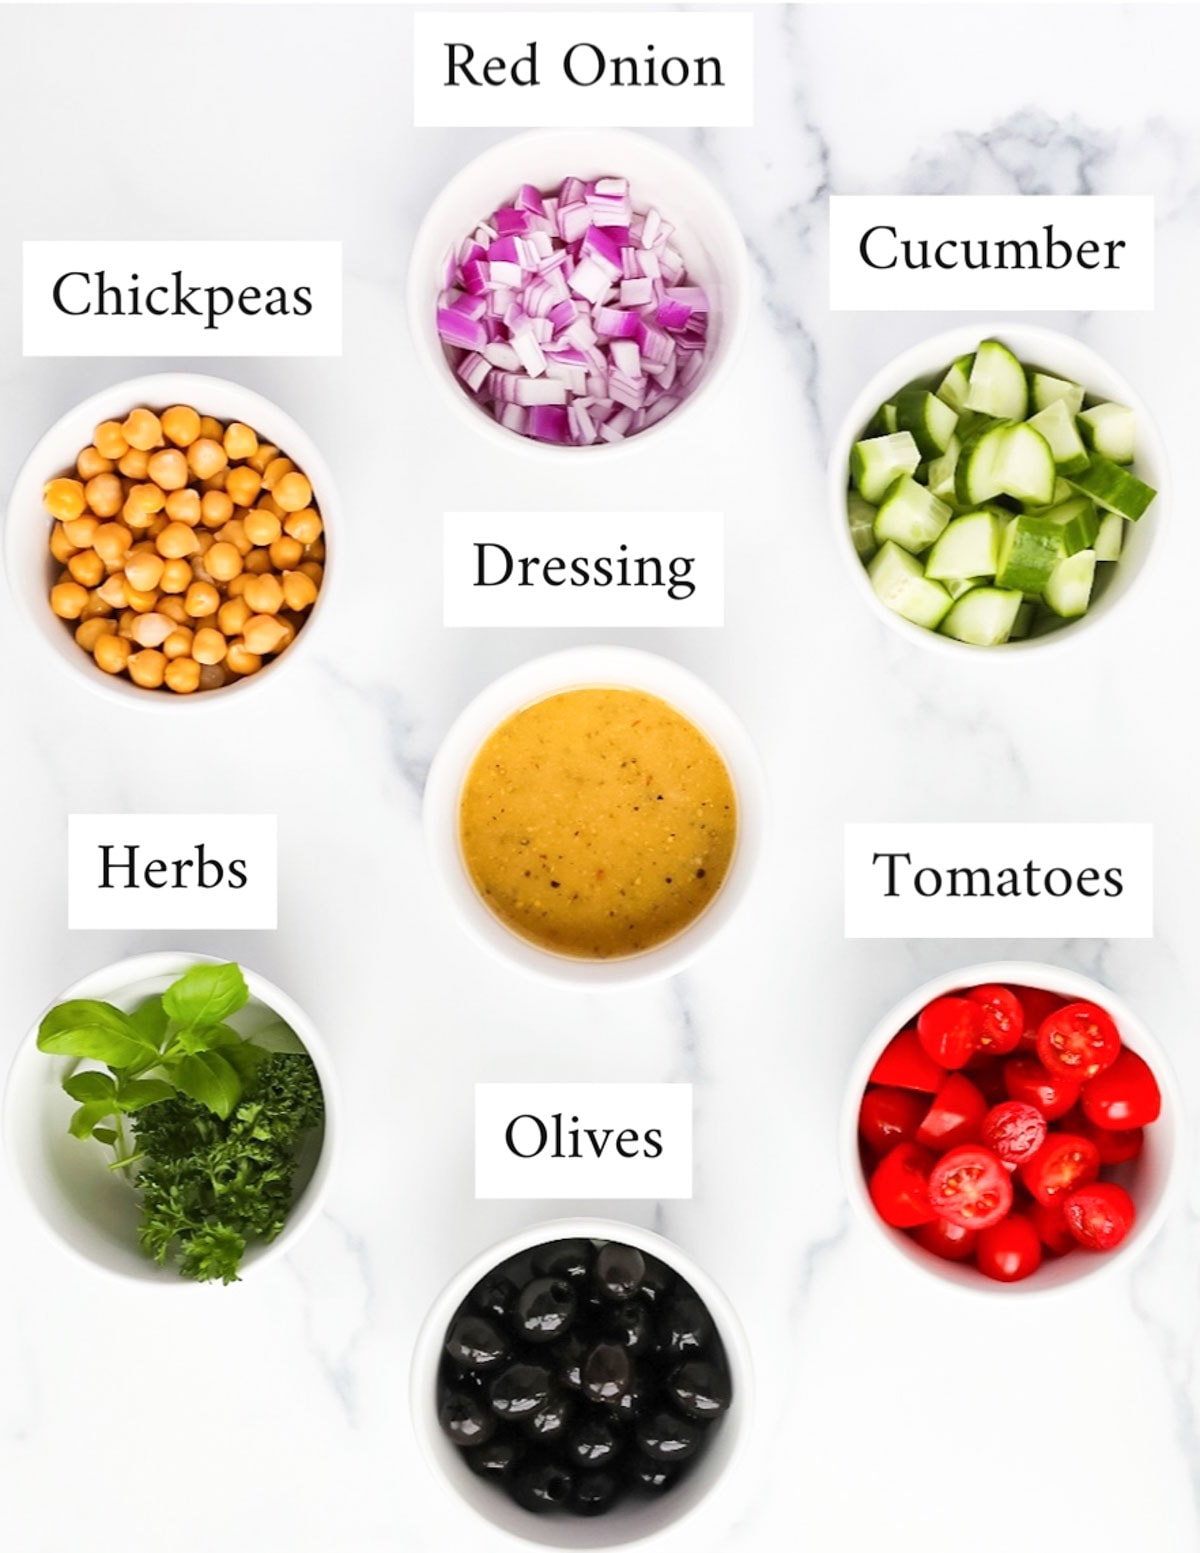 Labeled ingredients including: red onion, chickpeas, cucumber, dressing, herbs, olives, and tomatoes